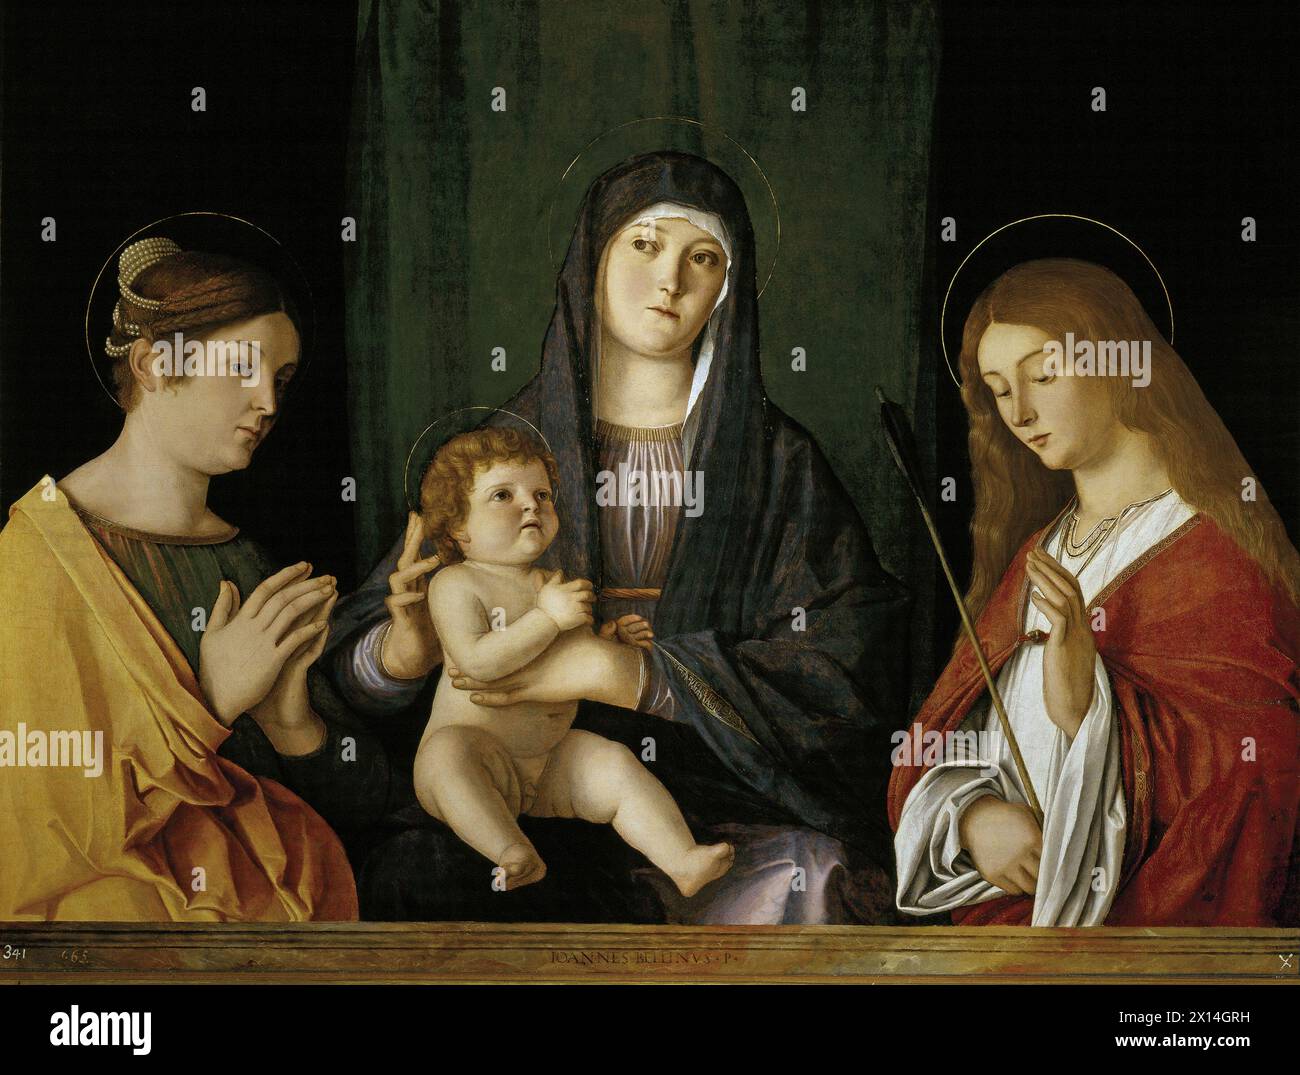 Madonna and Child with Saint Mary Magdalene and Saint Ursula or Virgin and Child with Saints Magdalene and Ursula is an oil on panel painting by Giovanni Bellini that belongs to the sacra conversazione genre and dates to 1490. Stock Photo